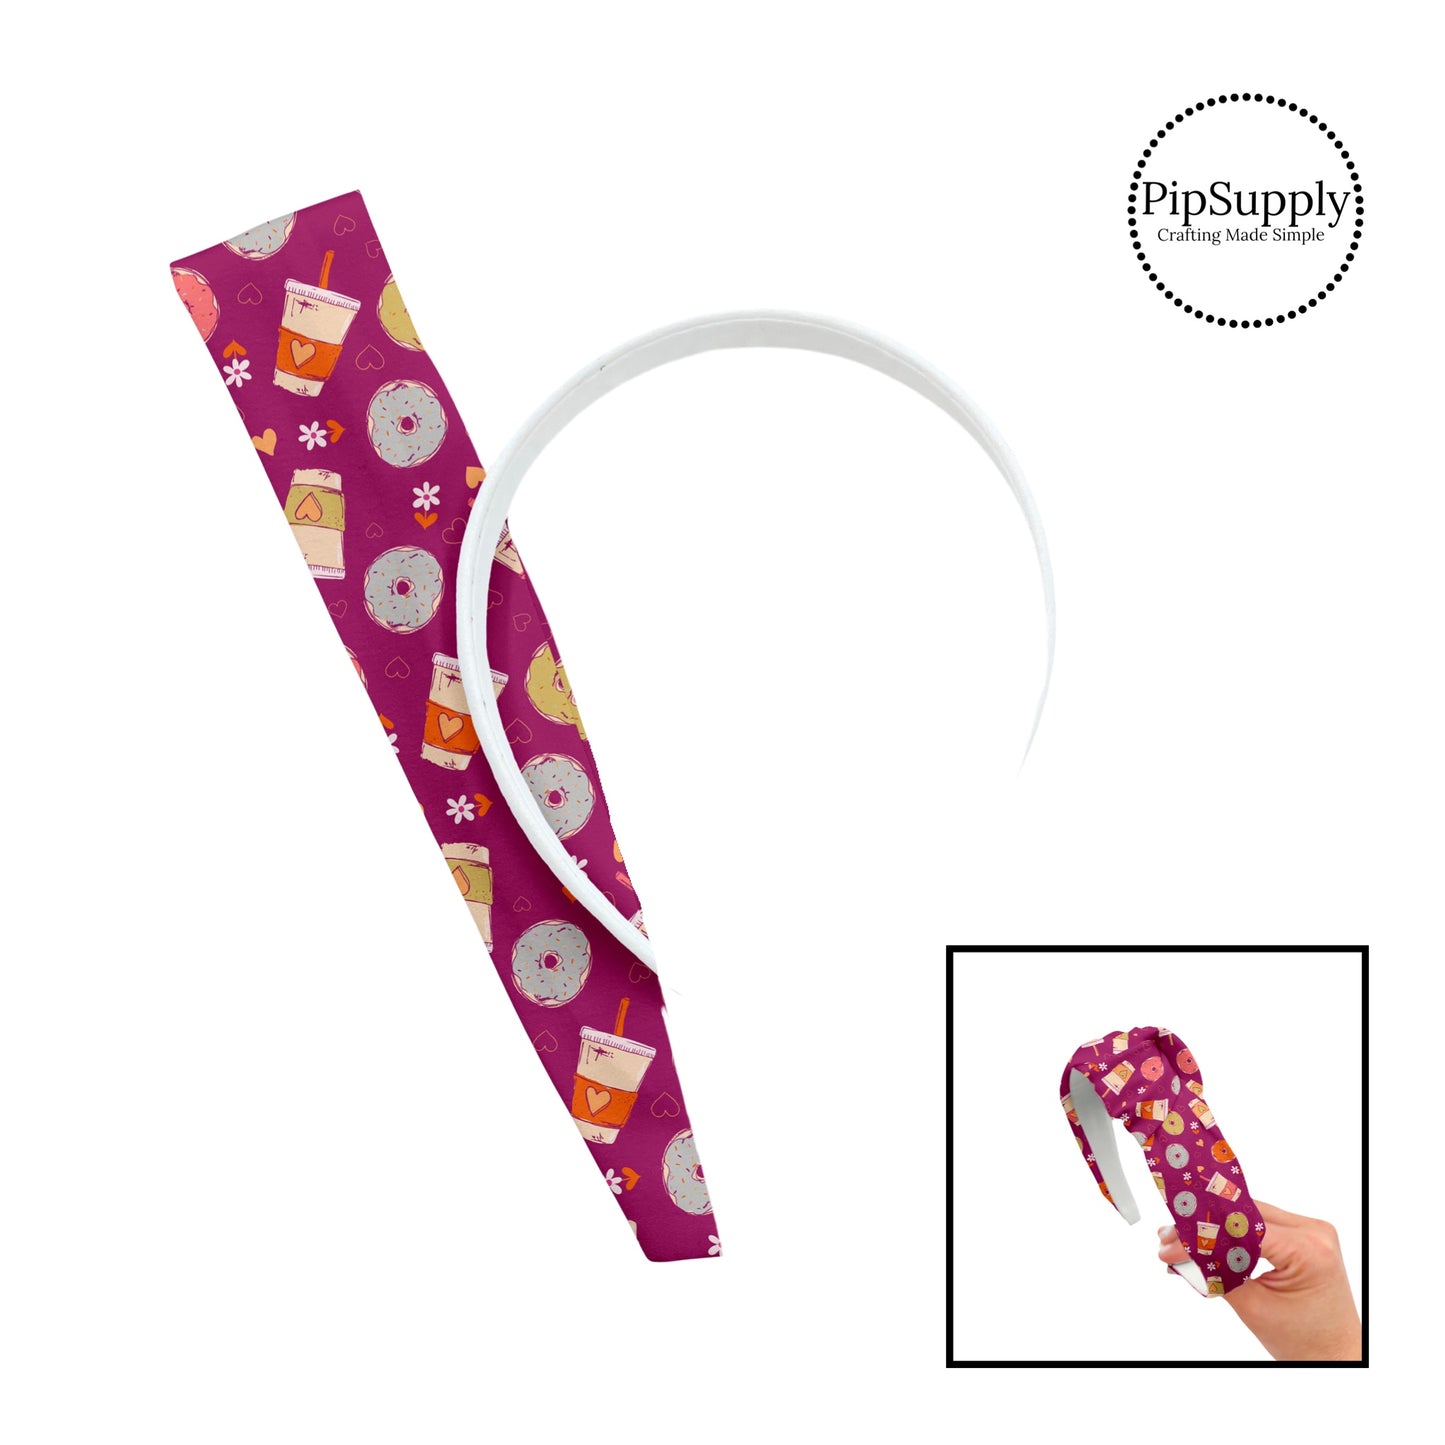 These patterned headband kits are easy to assemble and come with everything you need to make your own knotted headband. These Valentine's Day kits include a custom printed and sewn fabric strip and a coordinating velvet headband. This cute pattern features donuts and lattes on purple. 